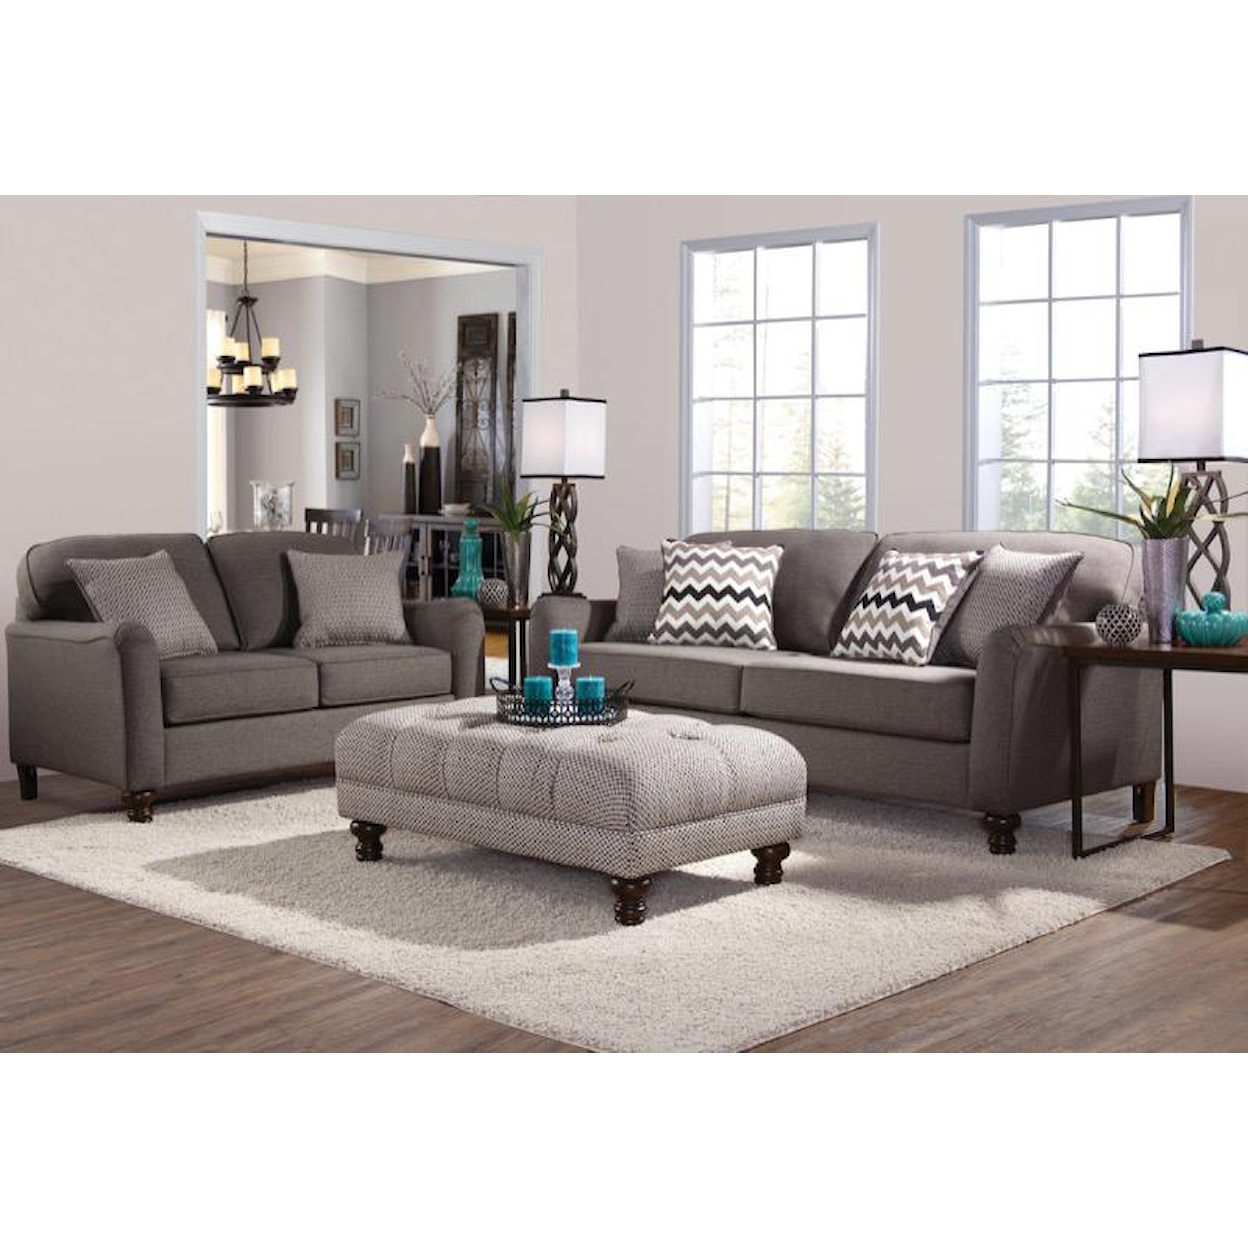 Serta Upholstery by Hughes Furniture 4050 Stationary Living Room Group